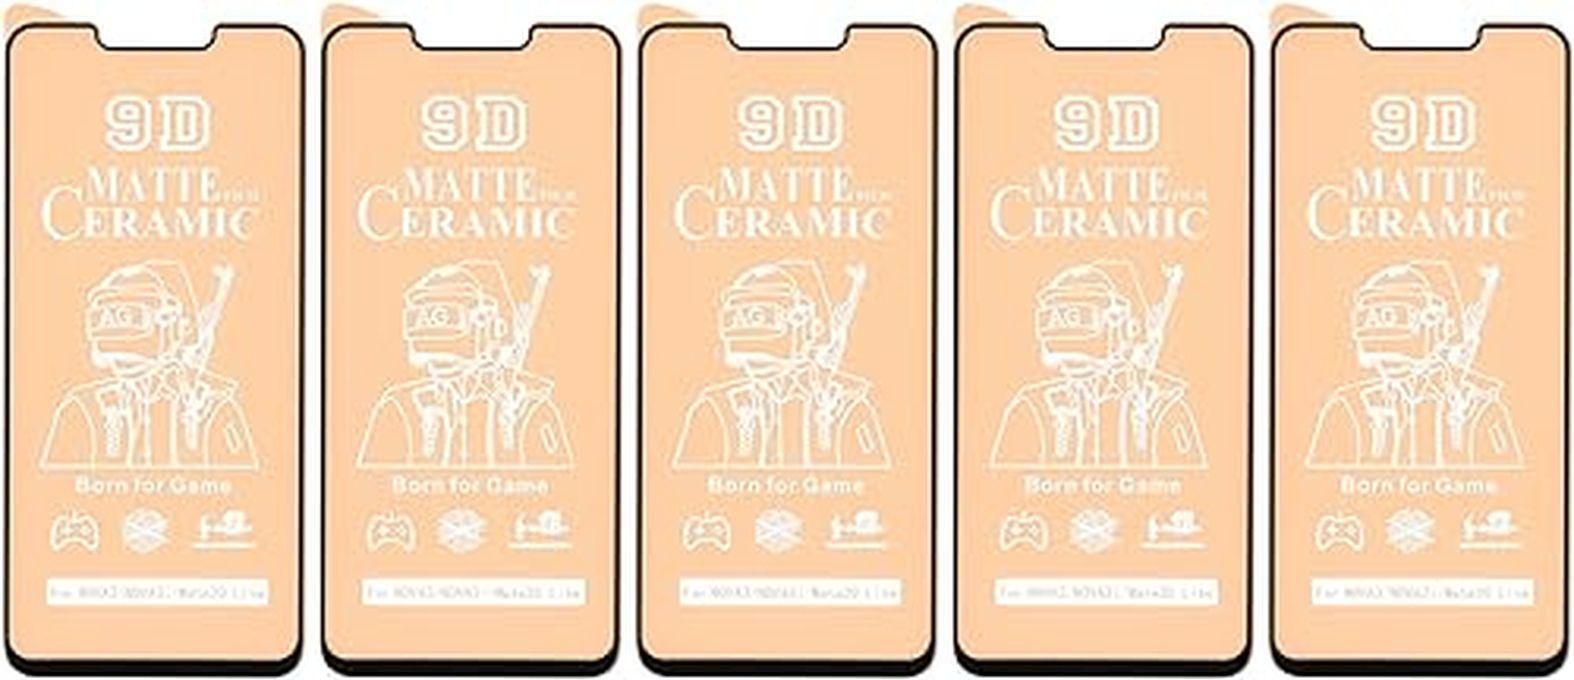 CeramicÂ 9D Non Breakable Screen Protector With Anti Fingerprint And Black Edges For Huawei Nova 3i 6.3" Set Of 5 Pieces - Clear Black